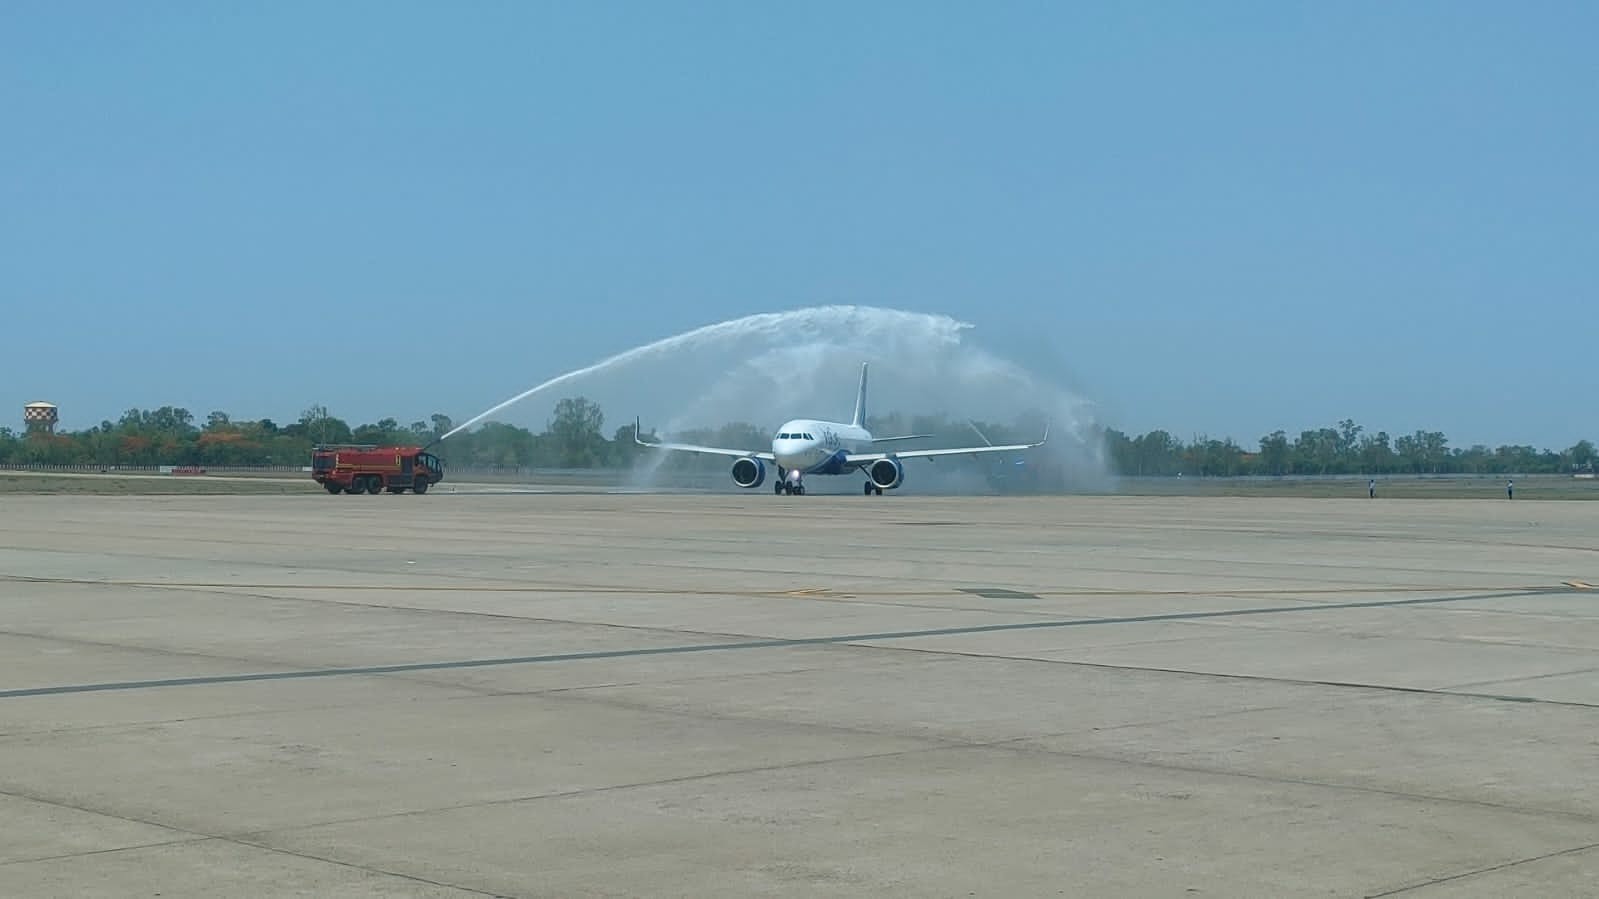 This summer it is easy to go from Bhopal to Goa, Indigo flight started